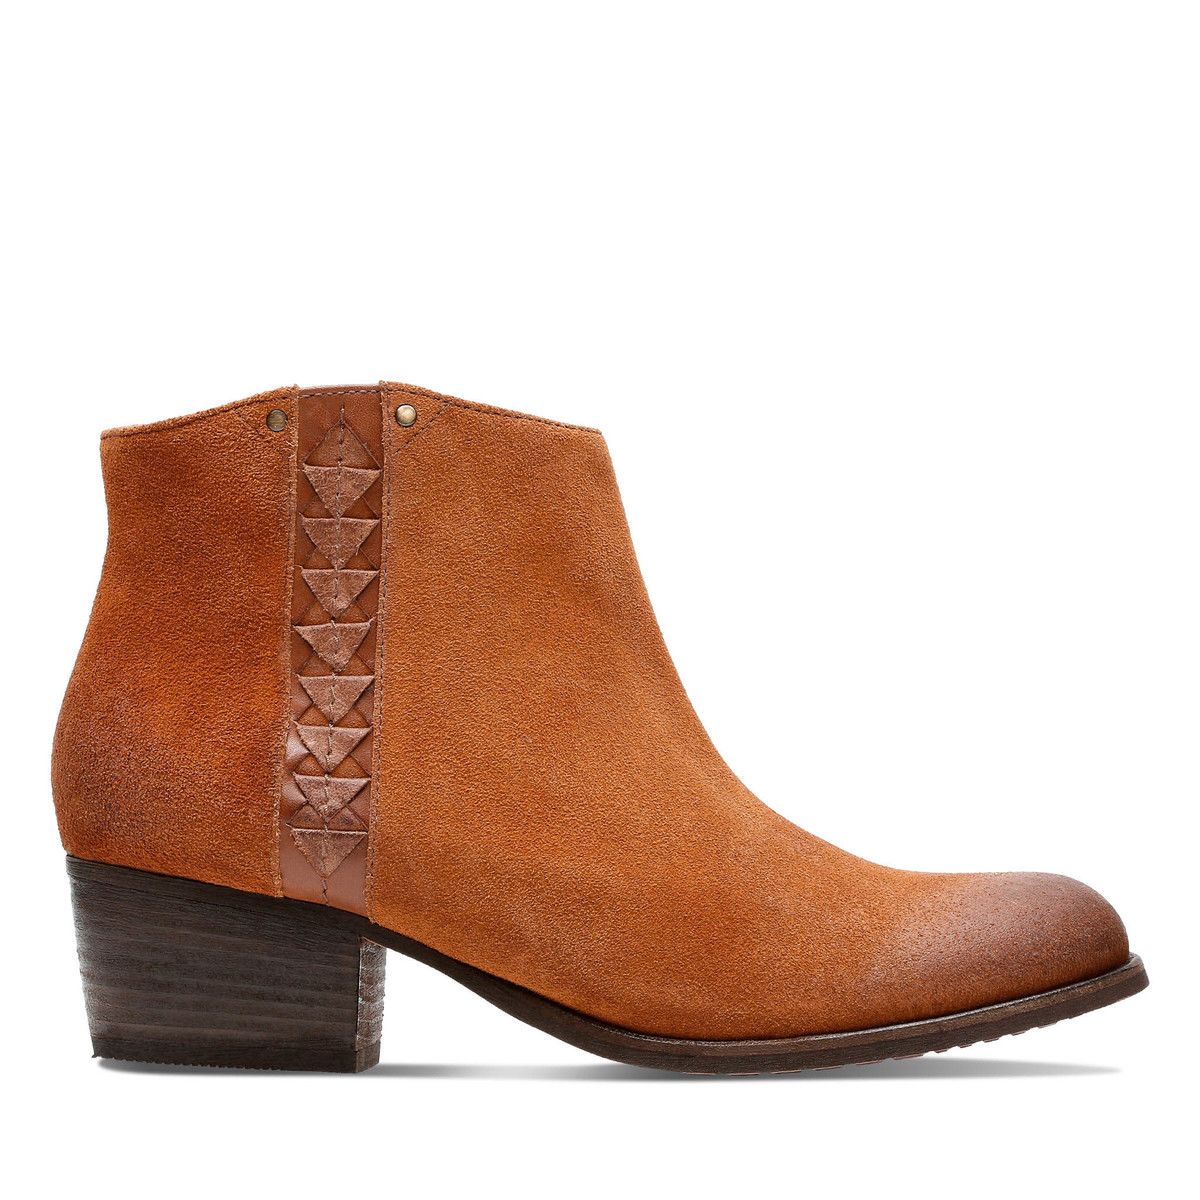 clarks maypearl fawn ankle boot